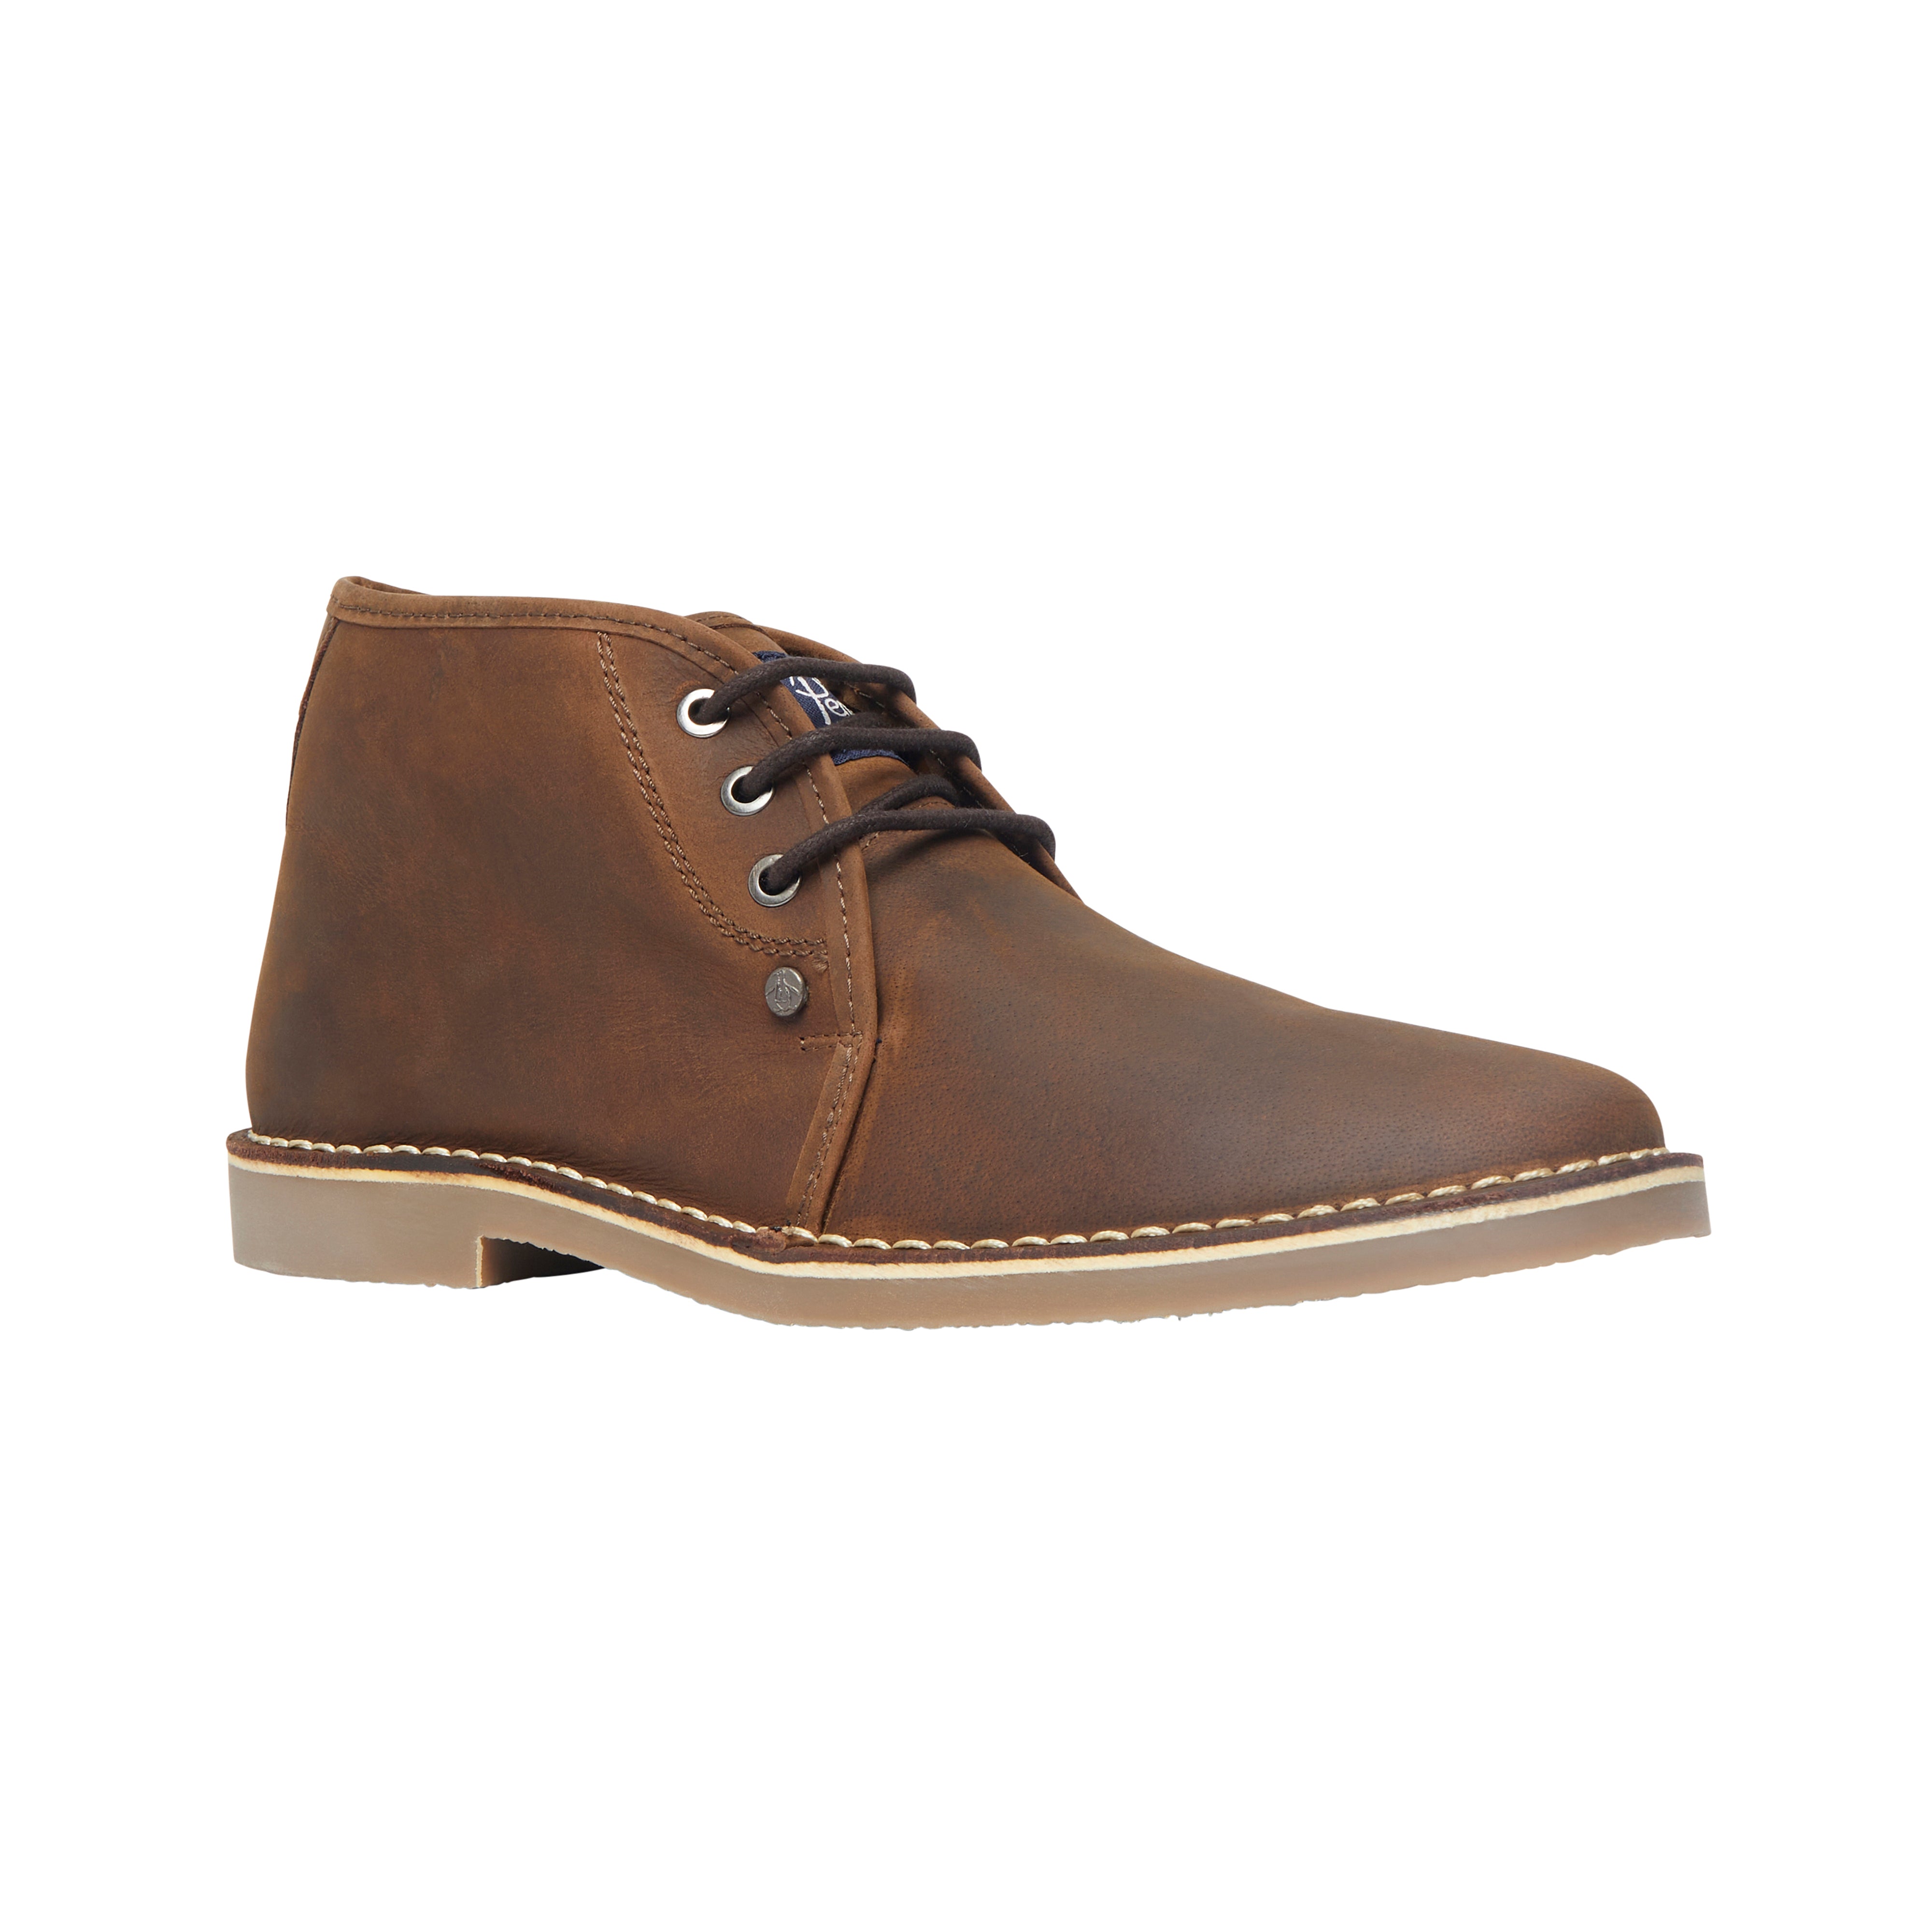 View Legal Leather Desert Boot In Leather Brown information